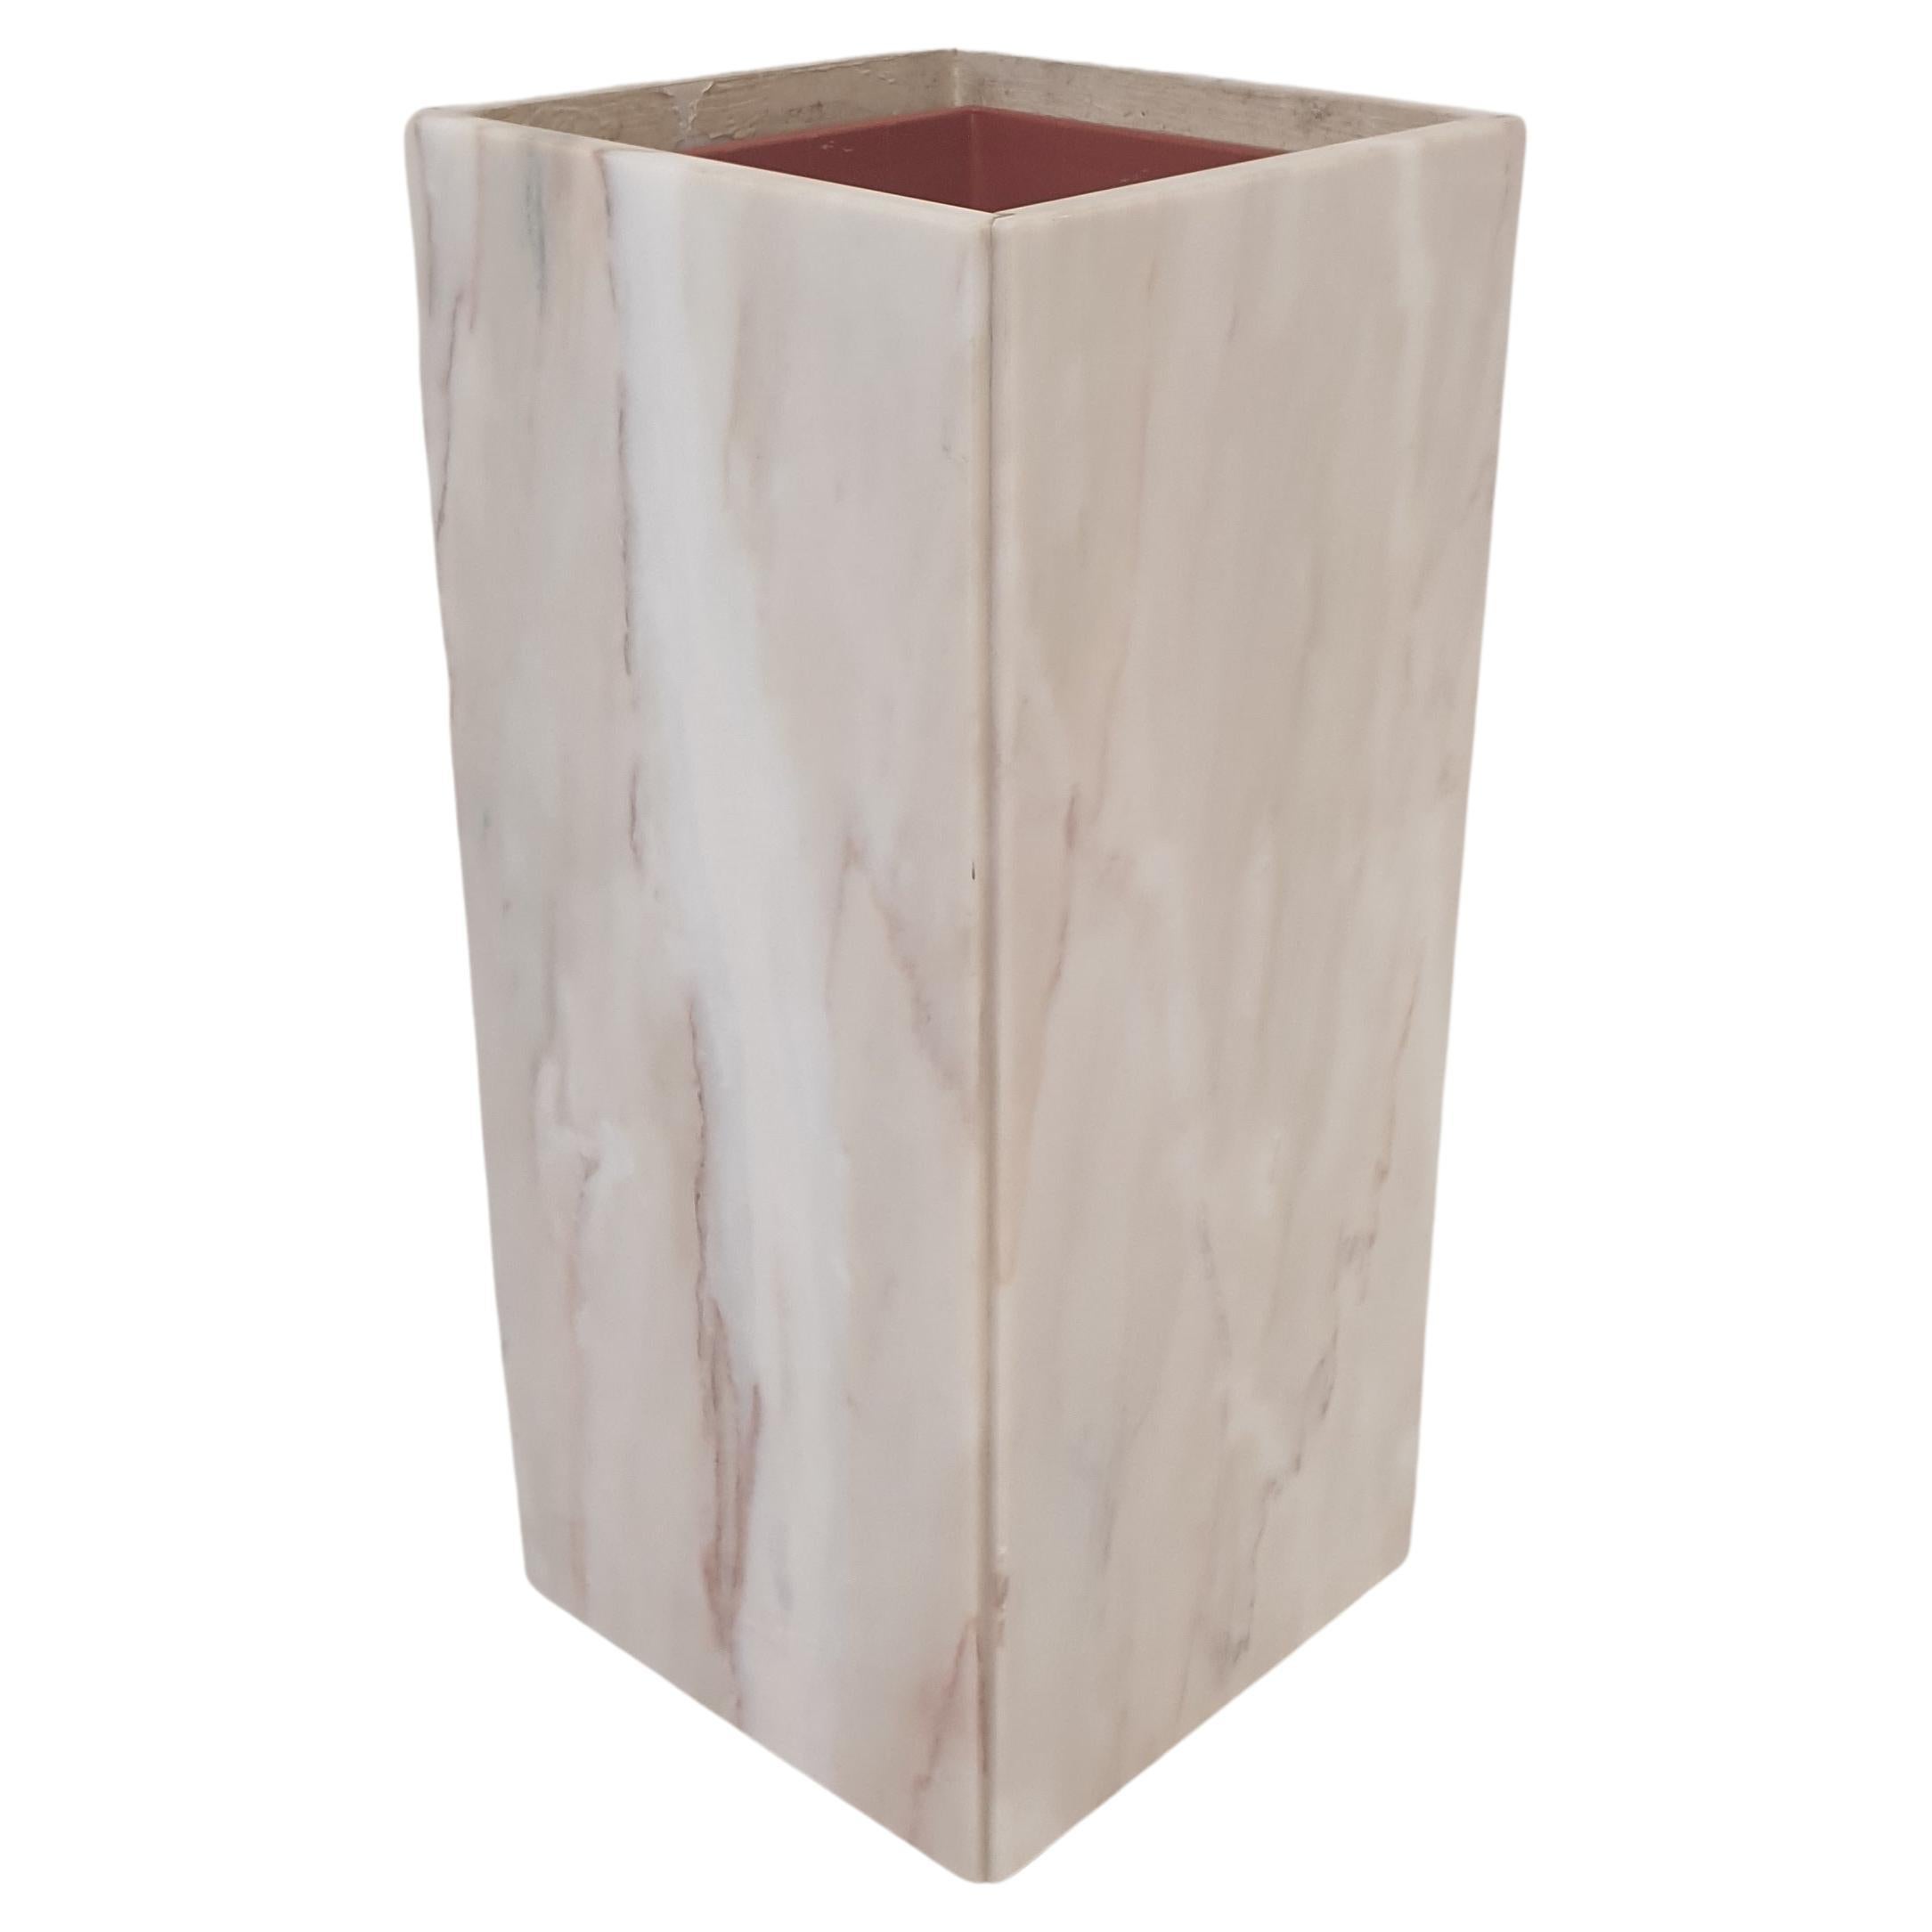 Italian Marble Planter or Pedestal with Light, 1970's